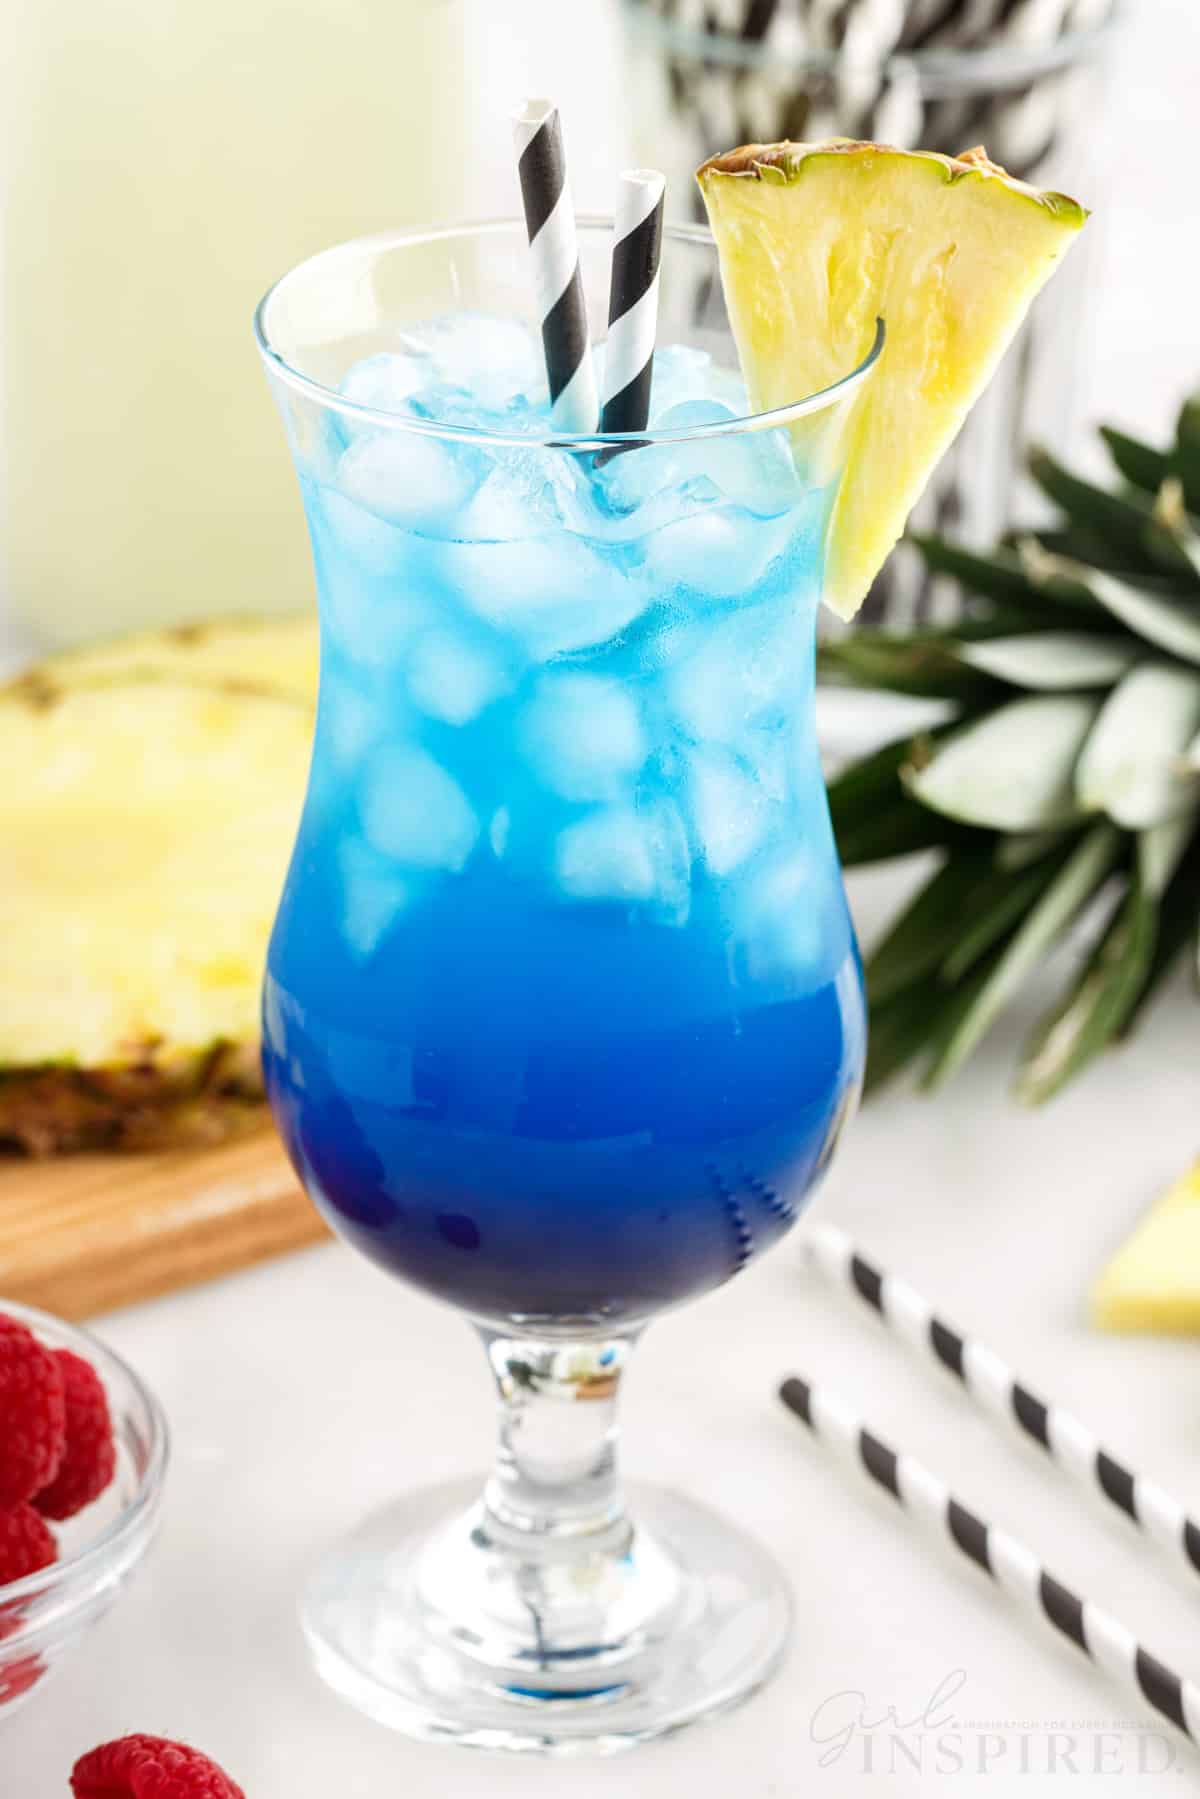 Hurricane style glass with blue fruit tingle cocktail and two black striped straws.